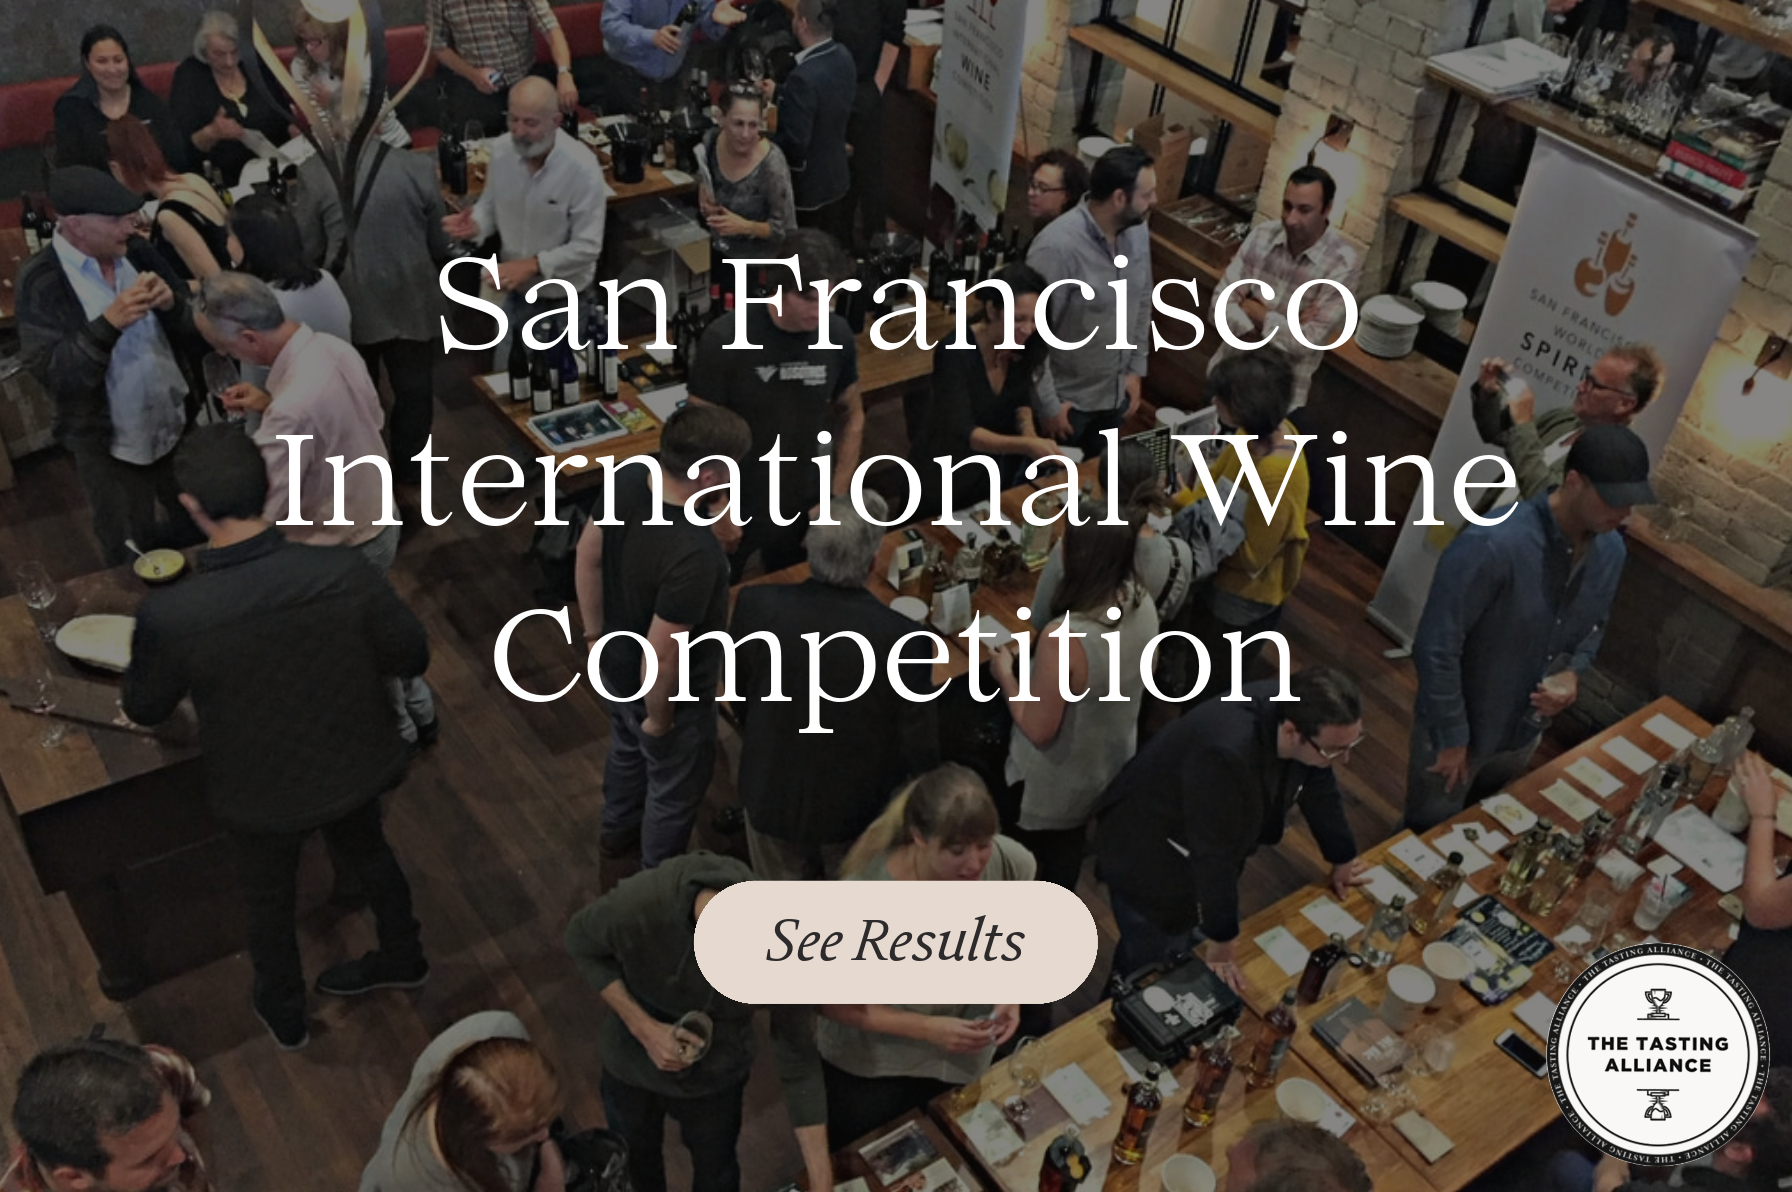 The results from The Tasting Alliance's San Francisco International Wine Competition